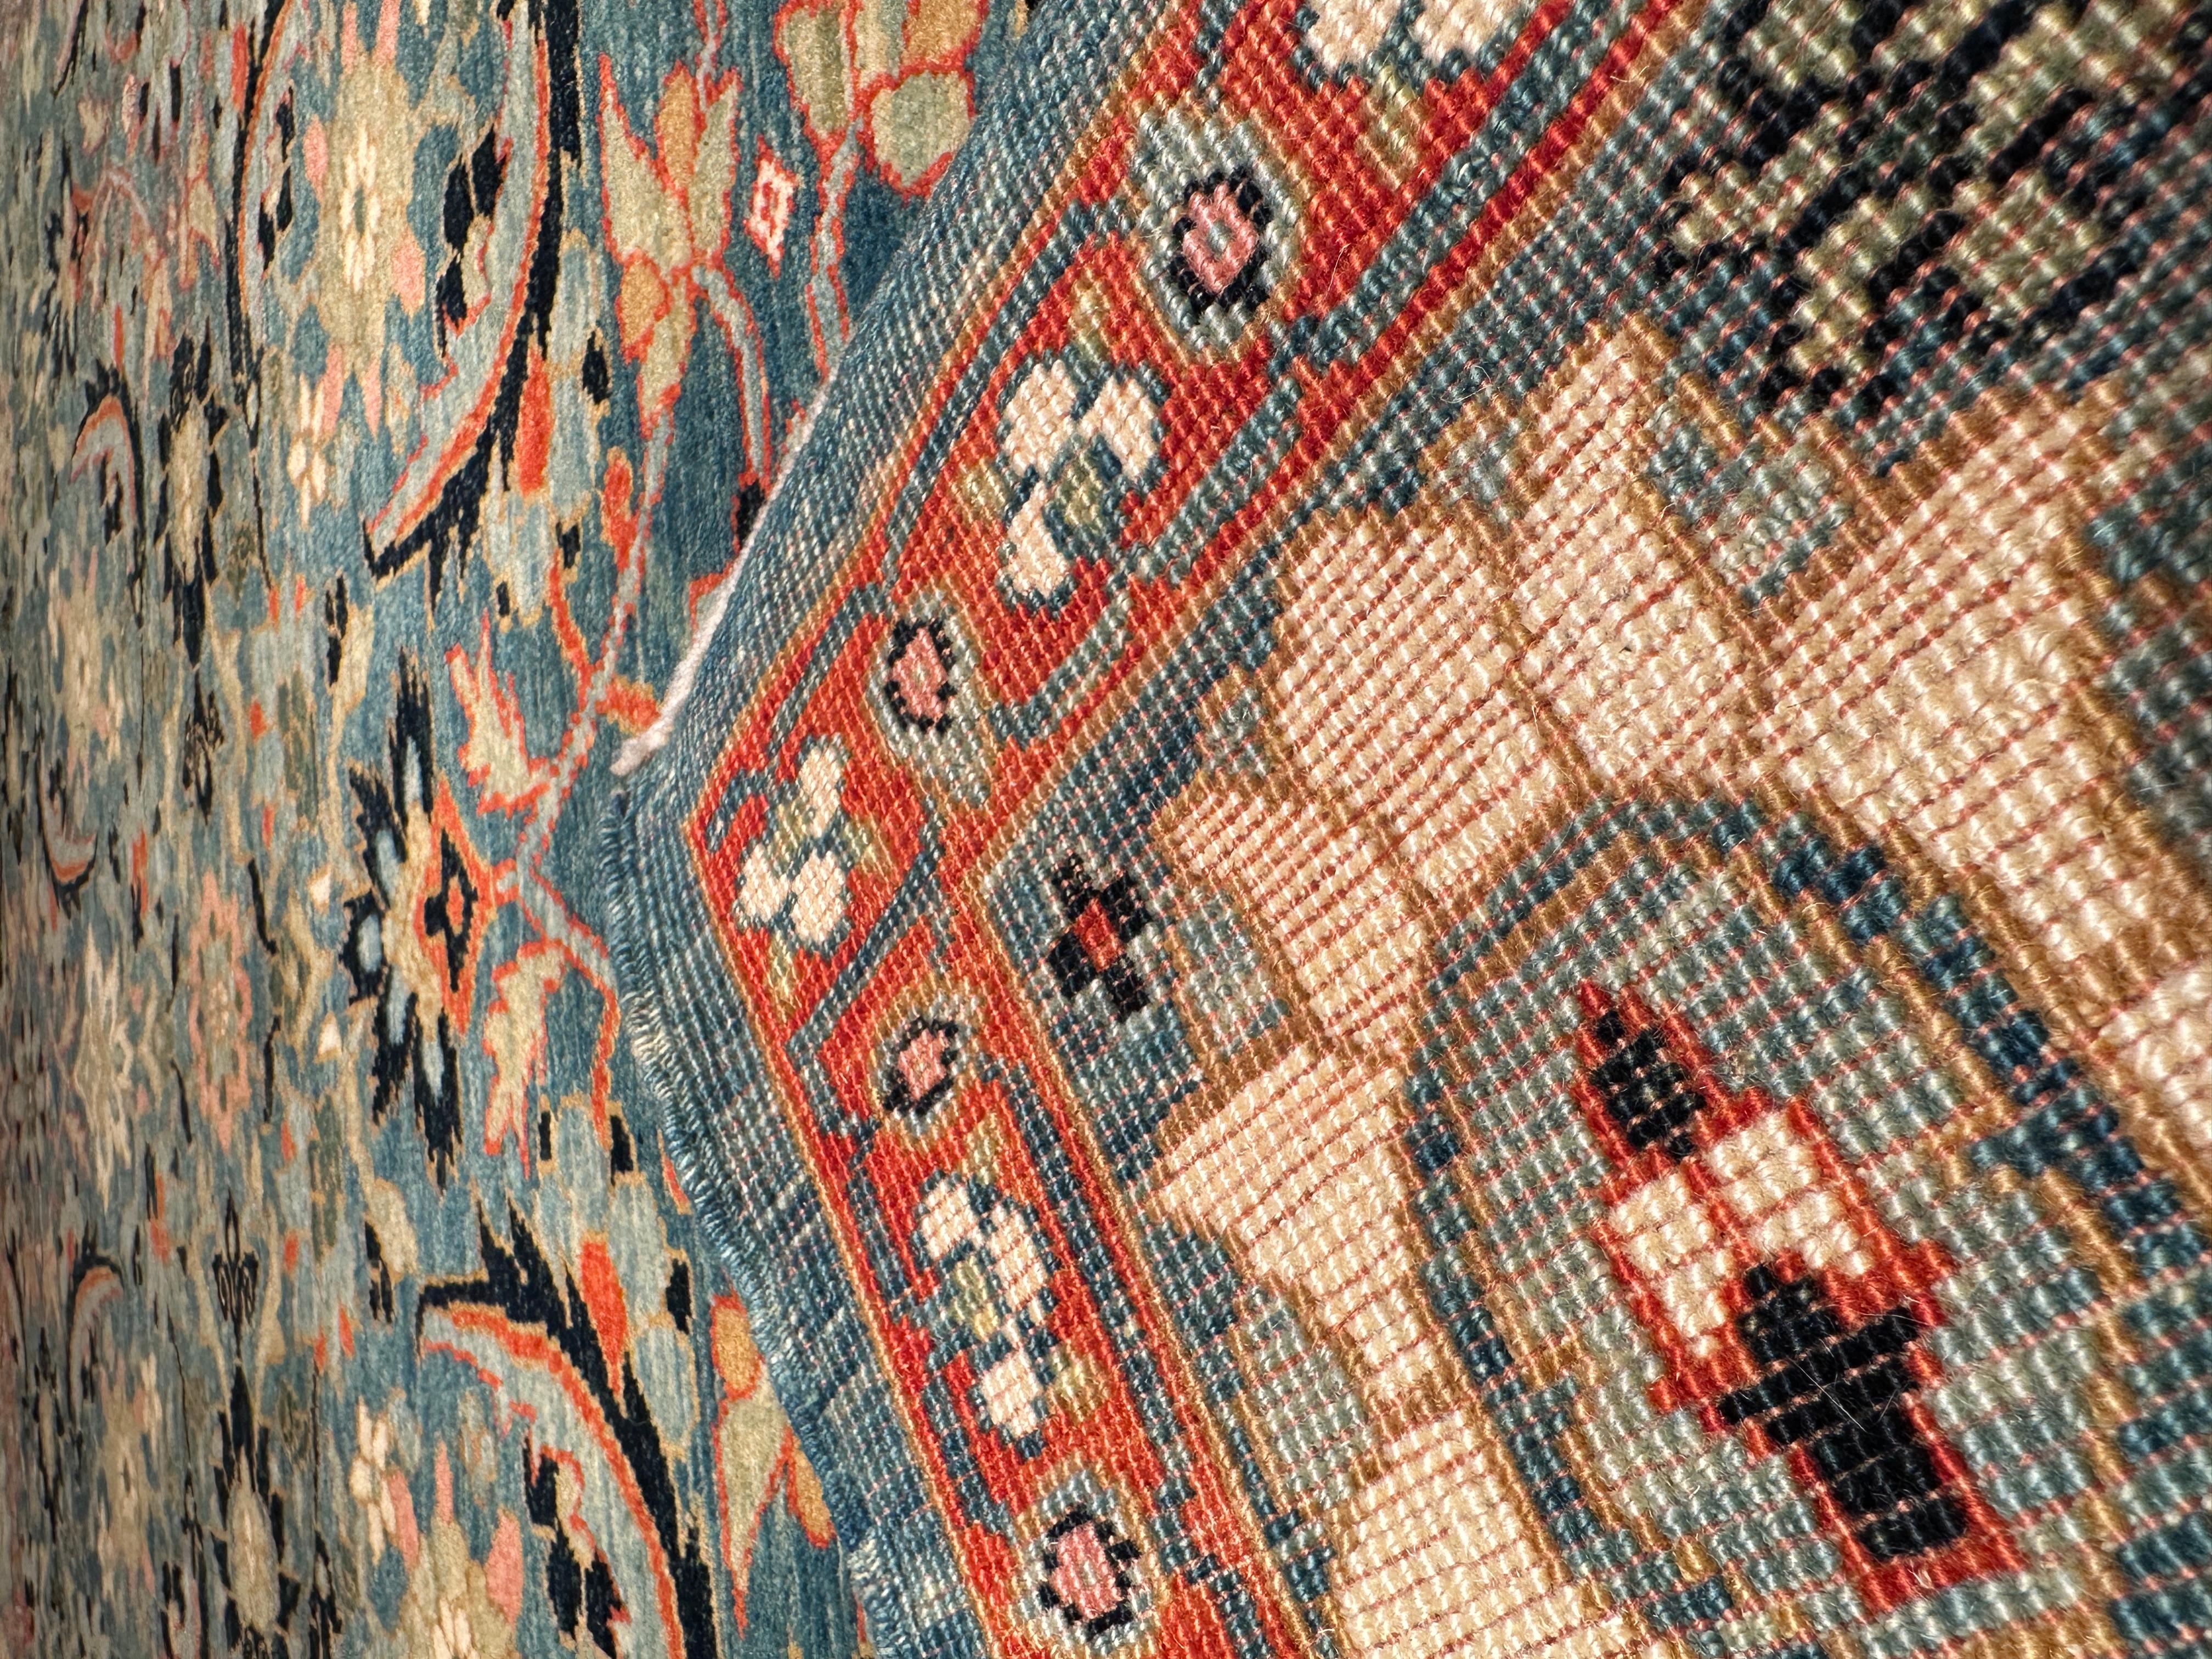 The source of the rug comes from the book Antique Rugs of Kurdistan a Historical Legacy of Woven Art, James D. Burns, 2002 nr.31. This blue background rug has a variation of Masi Awita (fish around the lotus) pattern from Senna, Eastern Kurdistan